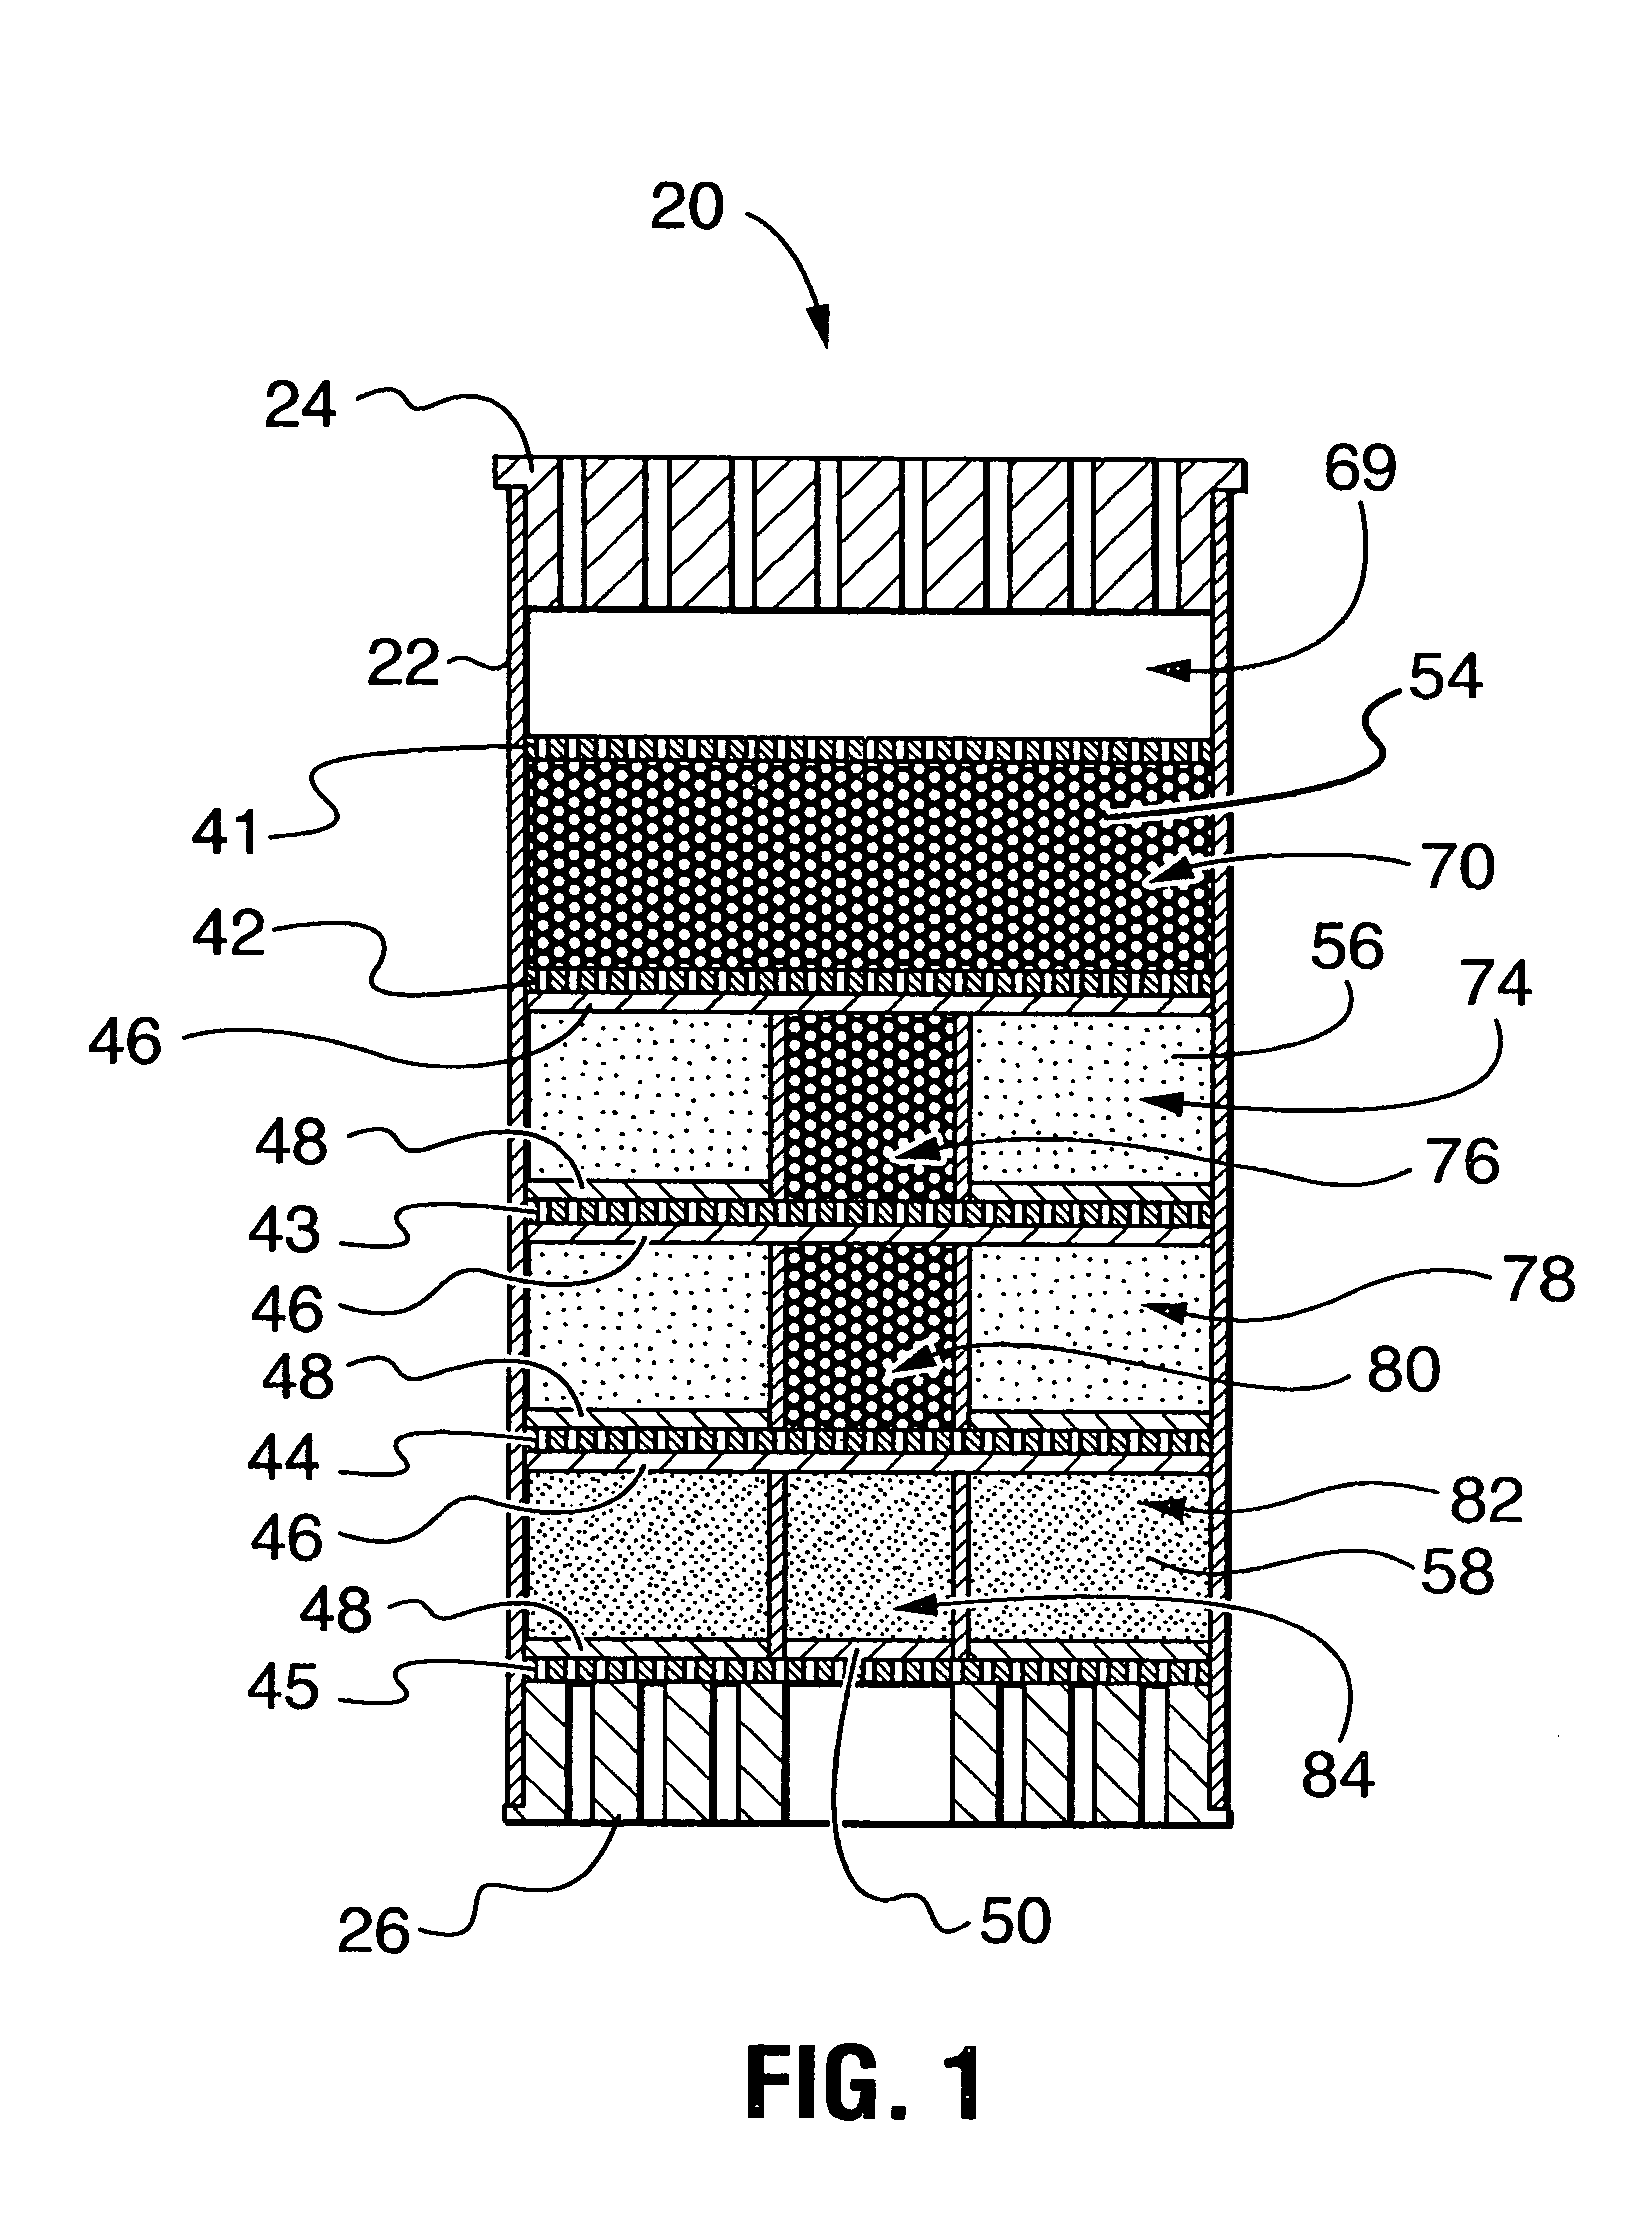 Filtration and plug drain device for containing oil and chemical spills